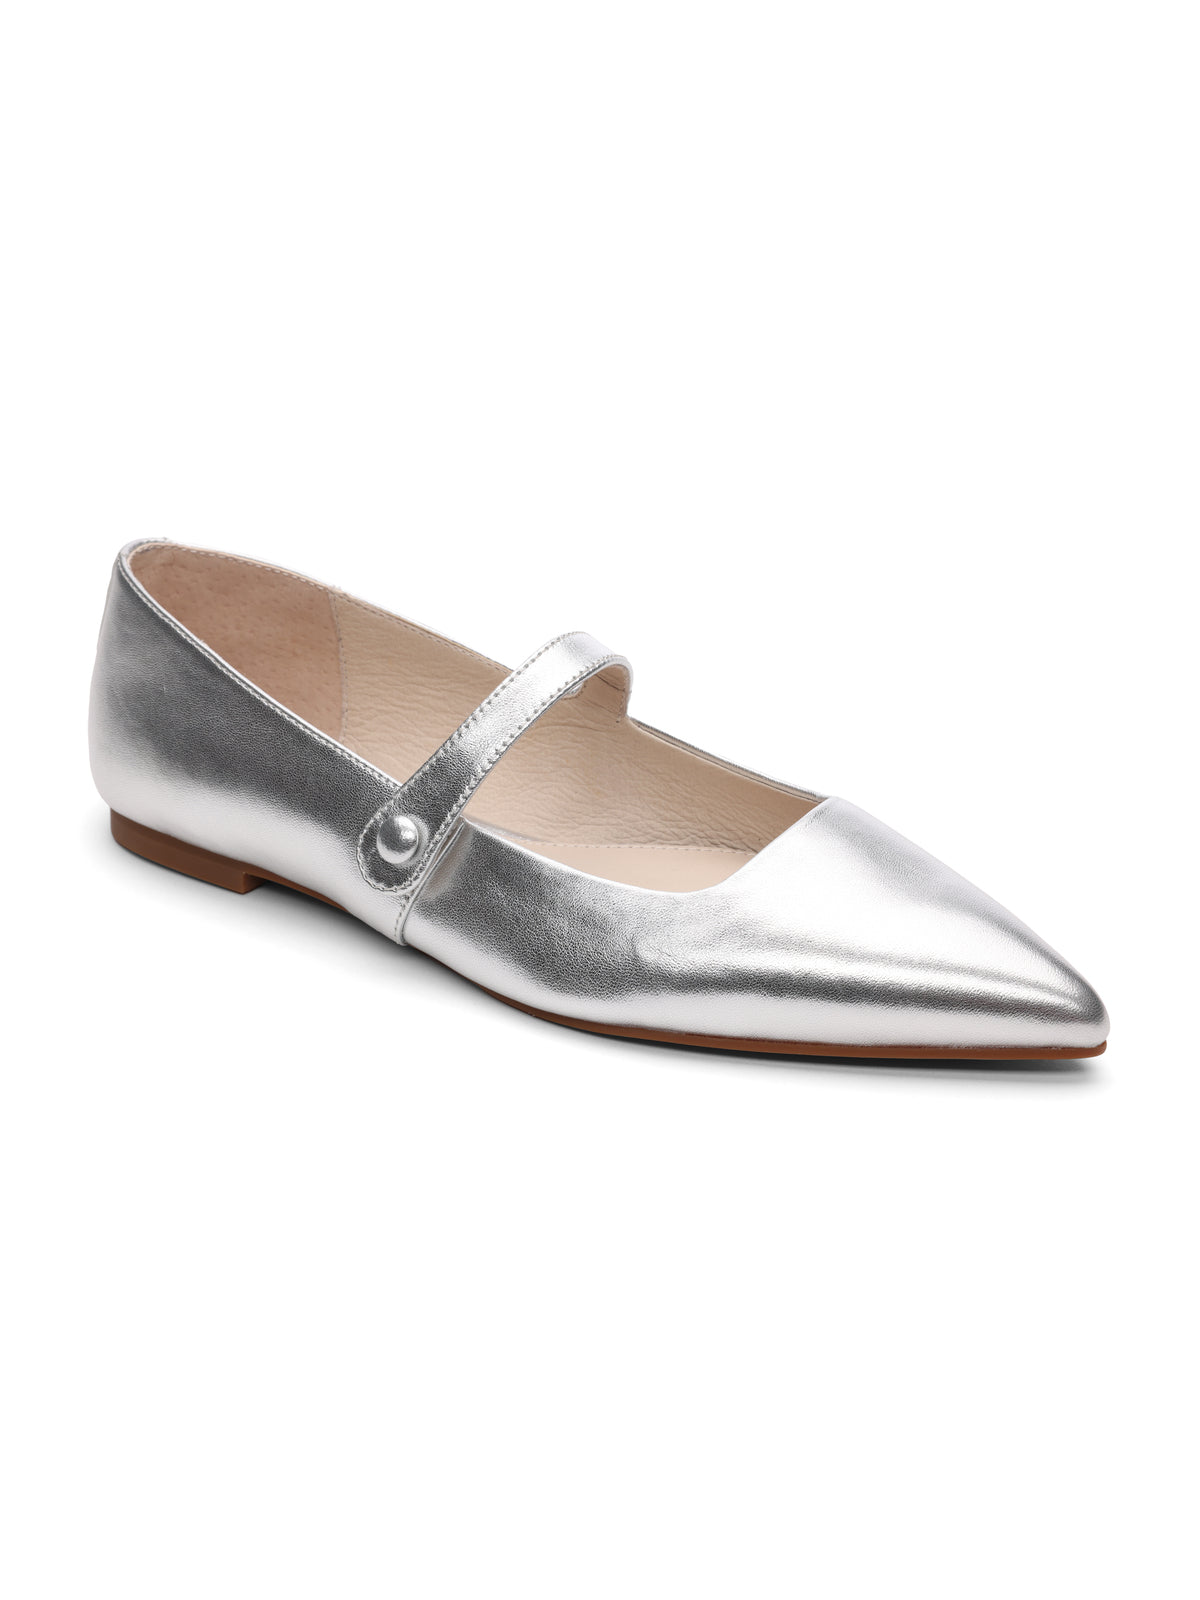 Clamour Ballet Flat White Gold